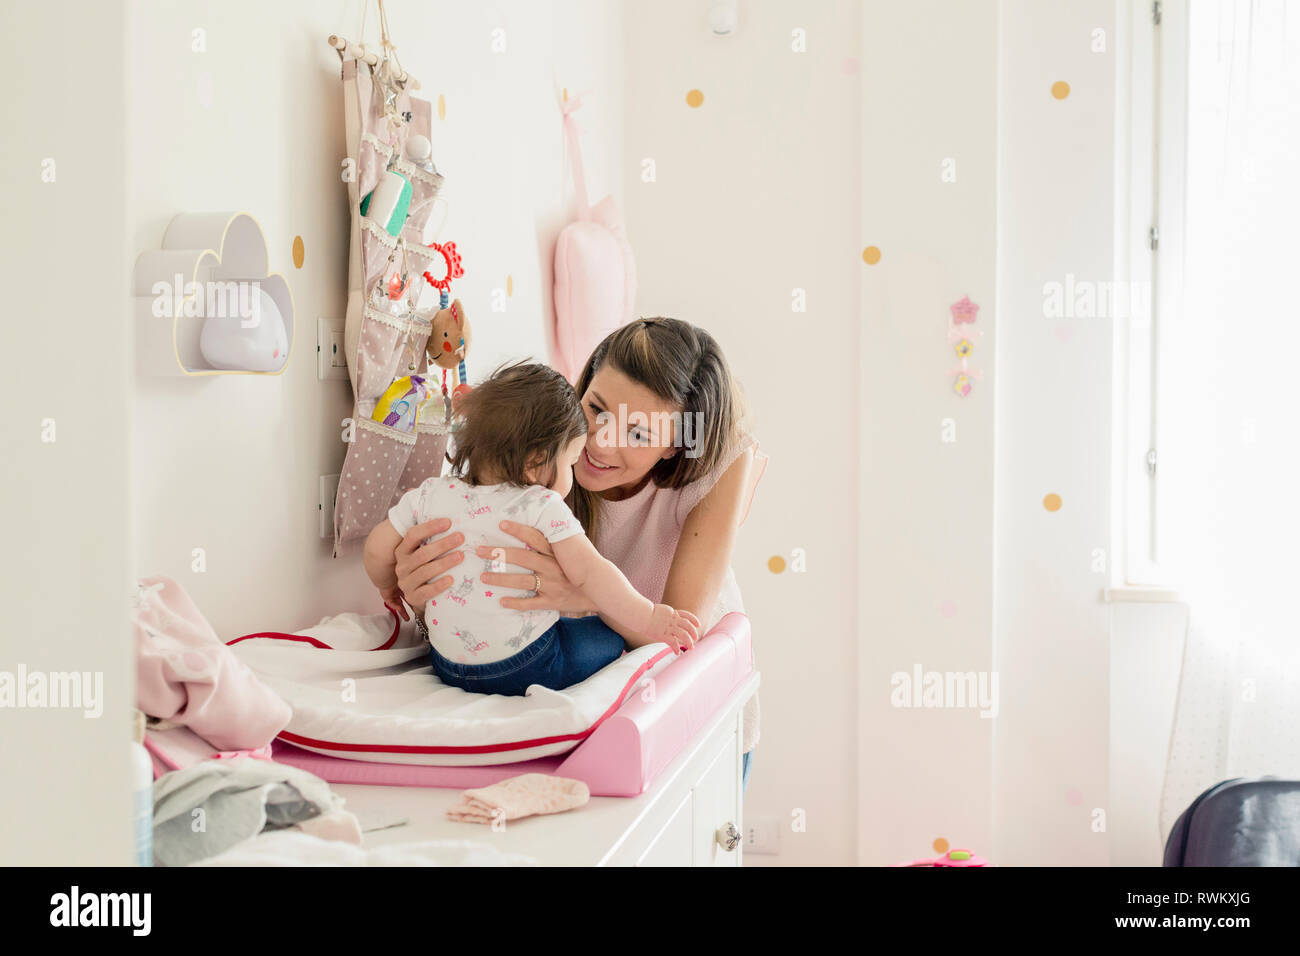 Mother talking to baby girl on changing table Stock Photo